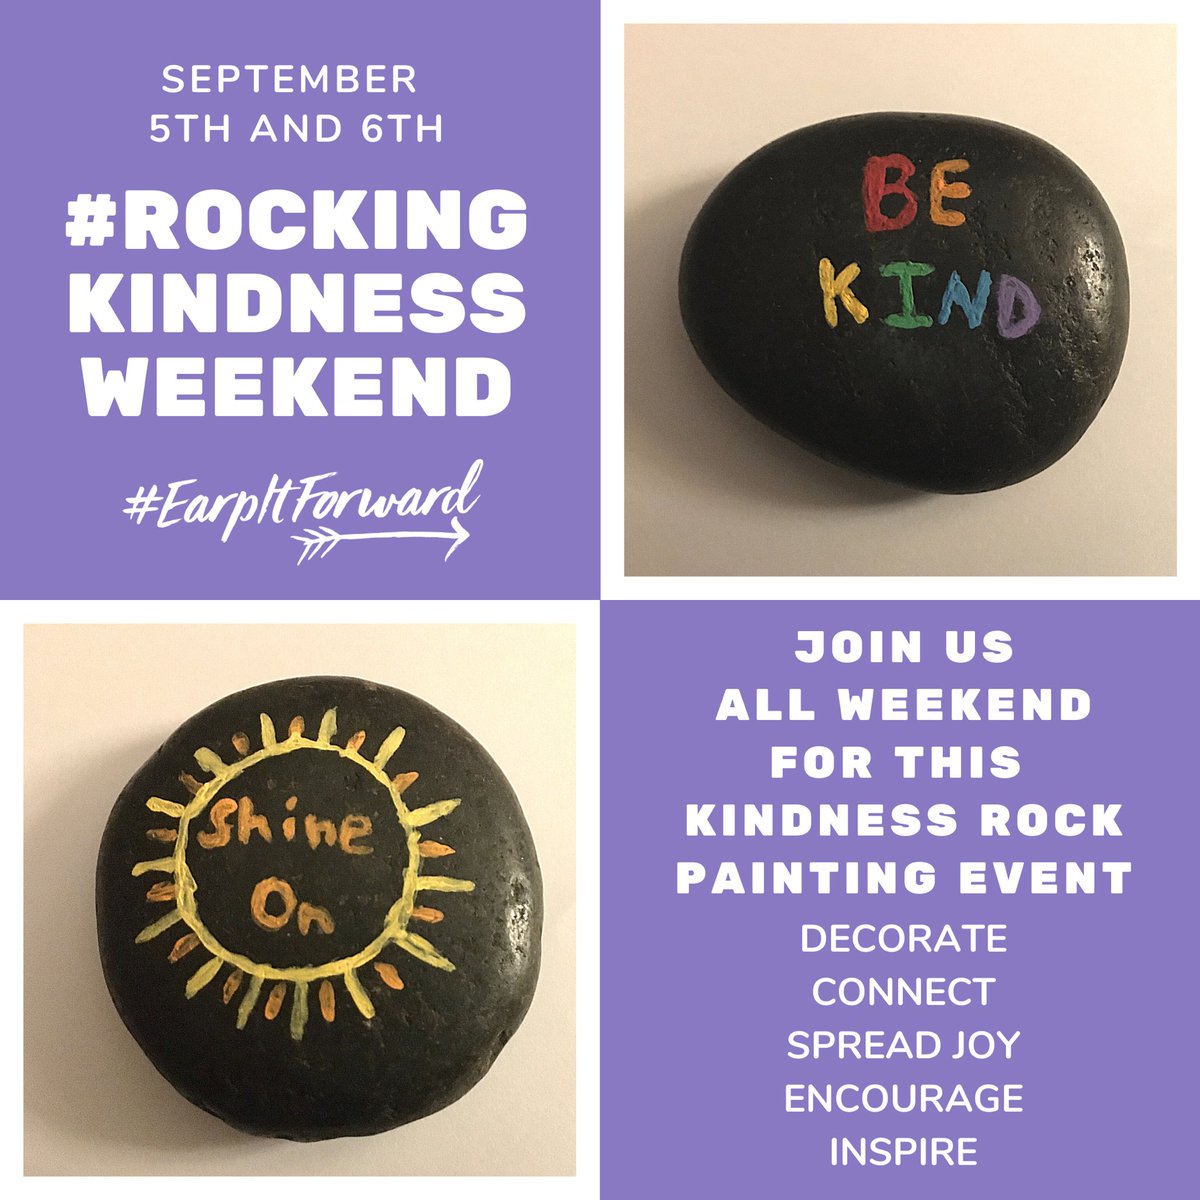 READY FOR  #ROCKINGKINDNESS WEEKEND?!  Interact! Connect! Create! Inspire! With this Kindness Rock Painting Event September 5th & 6th!  Virtual & social distancing friendly! OPEN TO ALL! All ages! All abilities! All about kindness! JOIN US! How-To and Details Below 